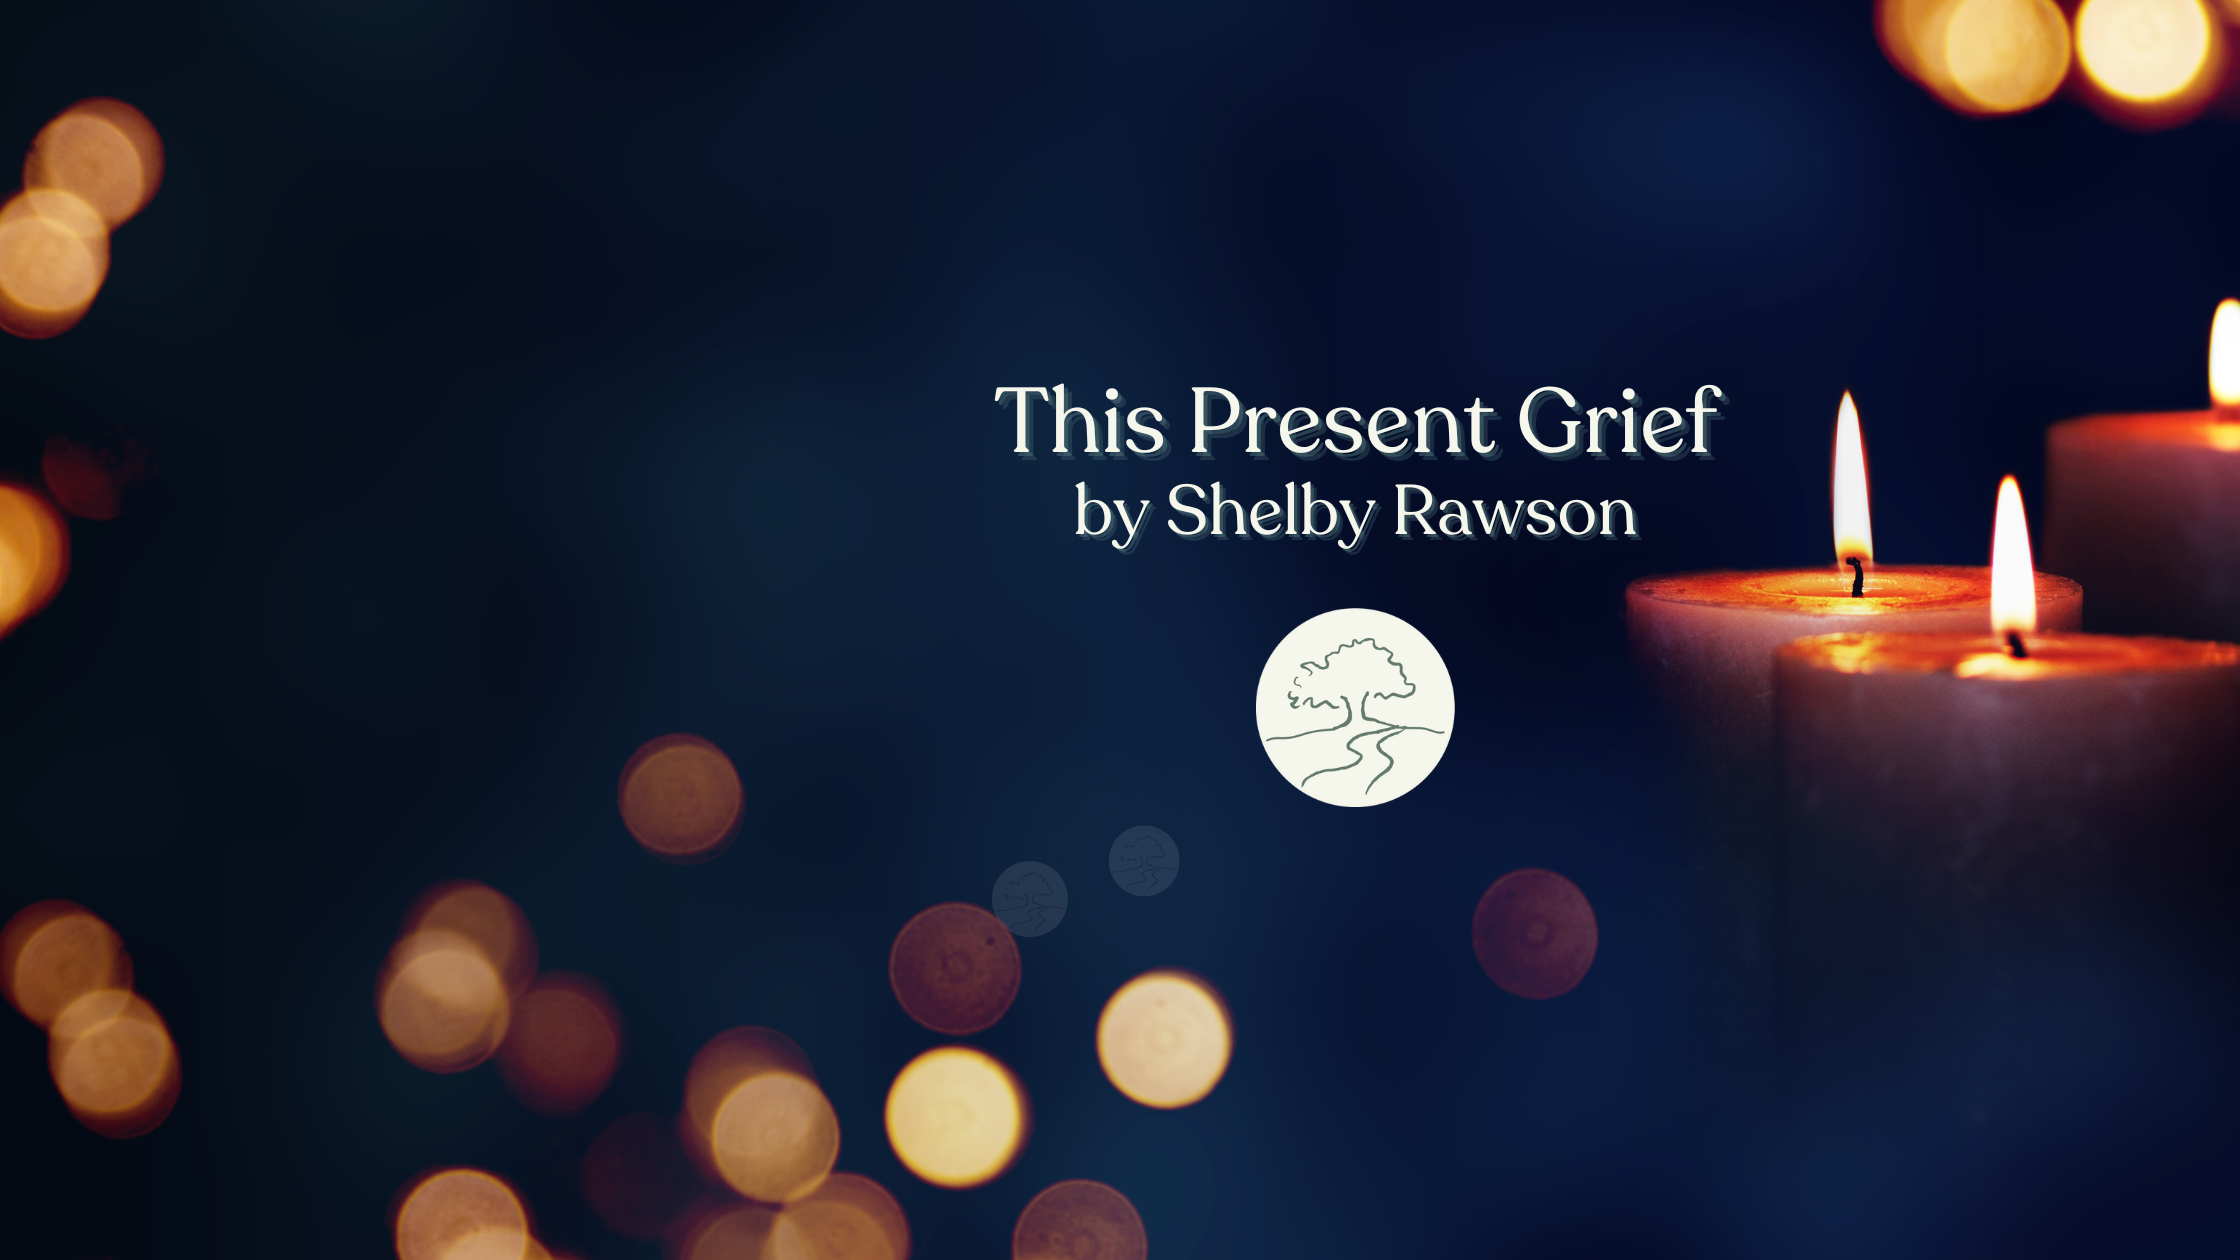 This Present Grief